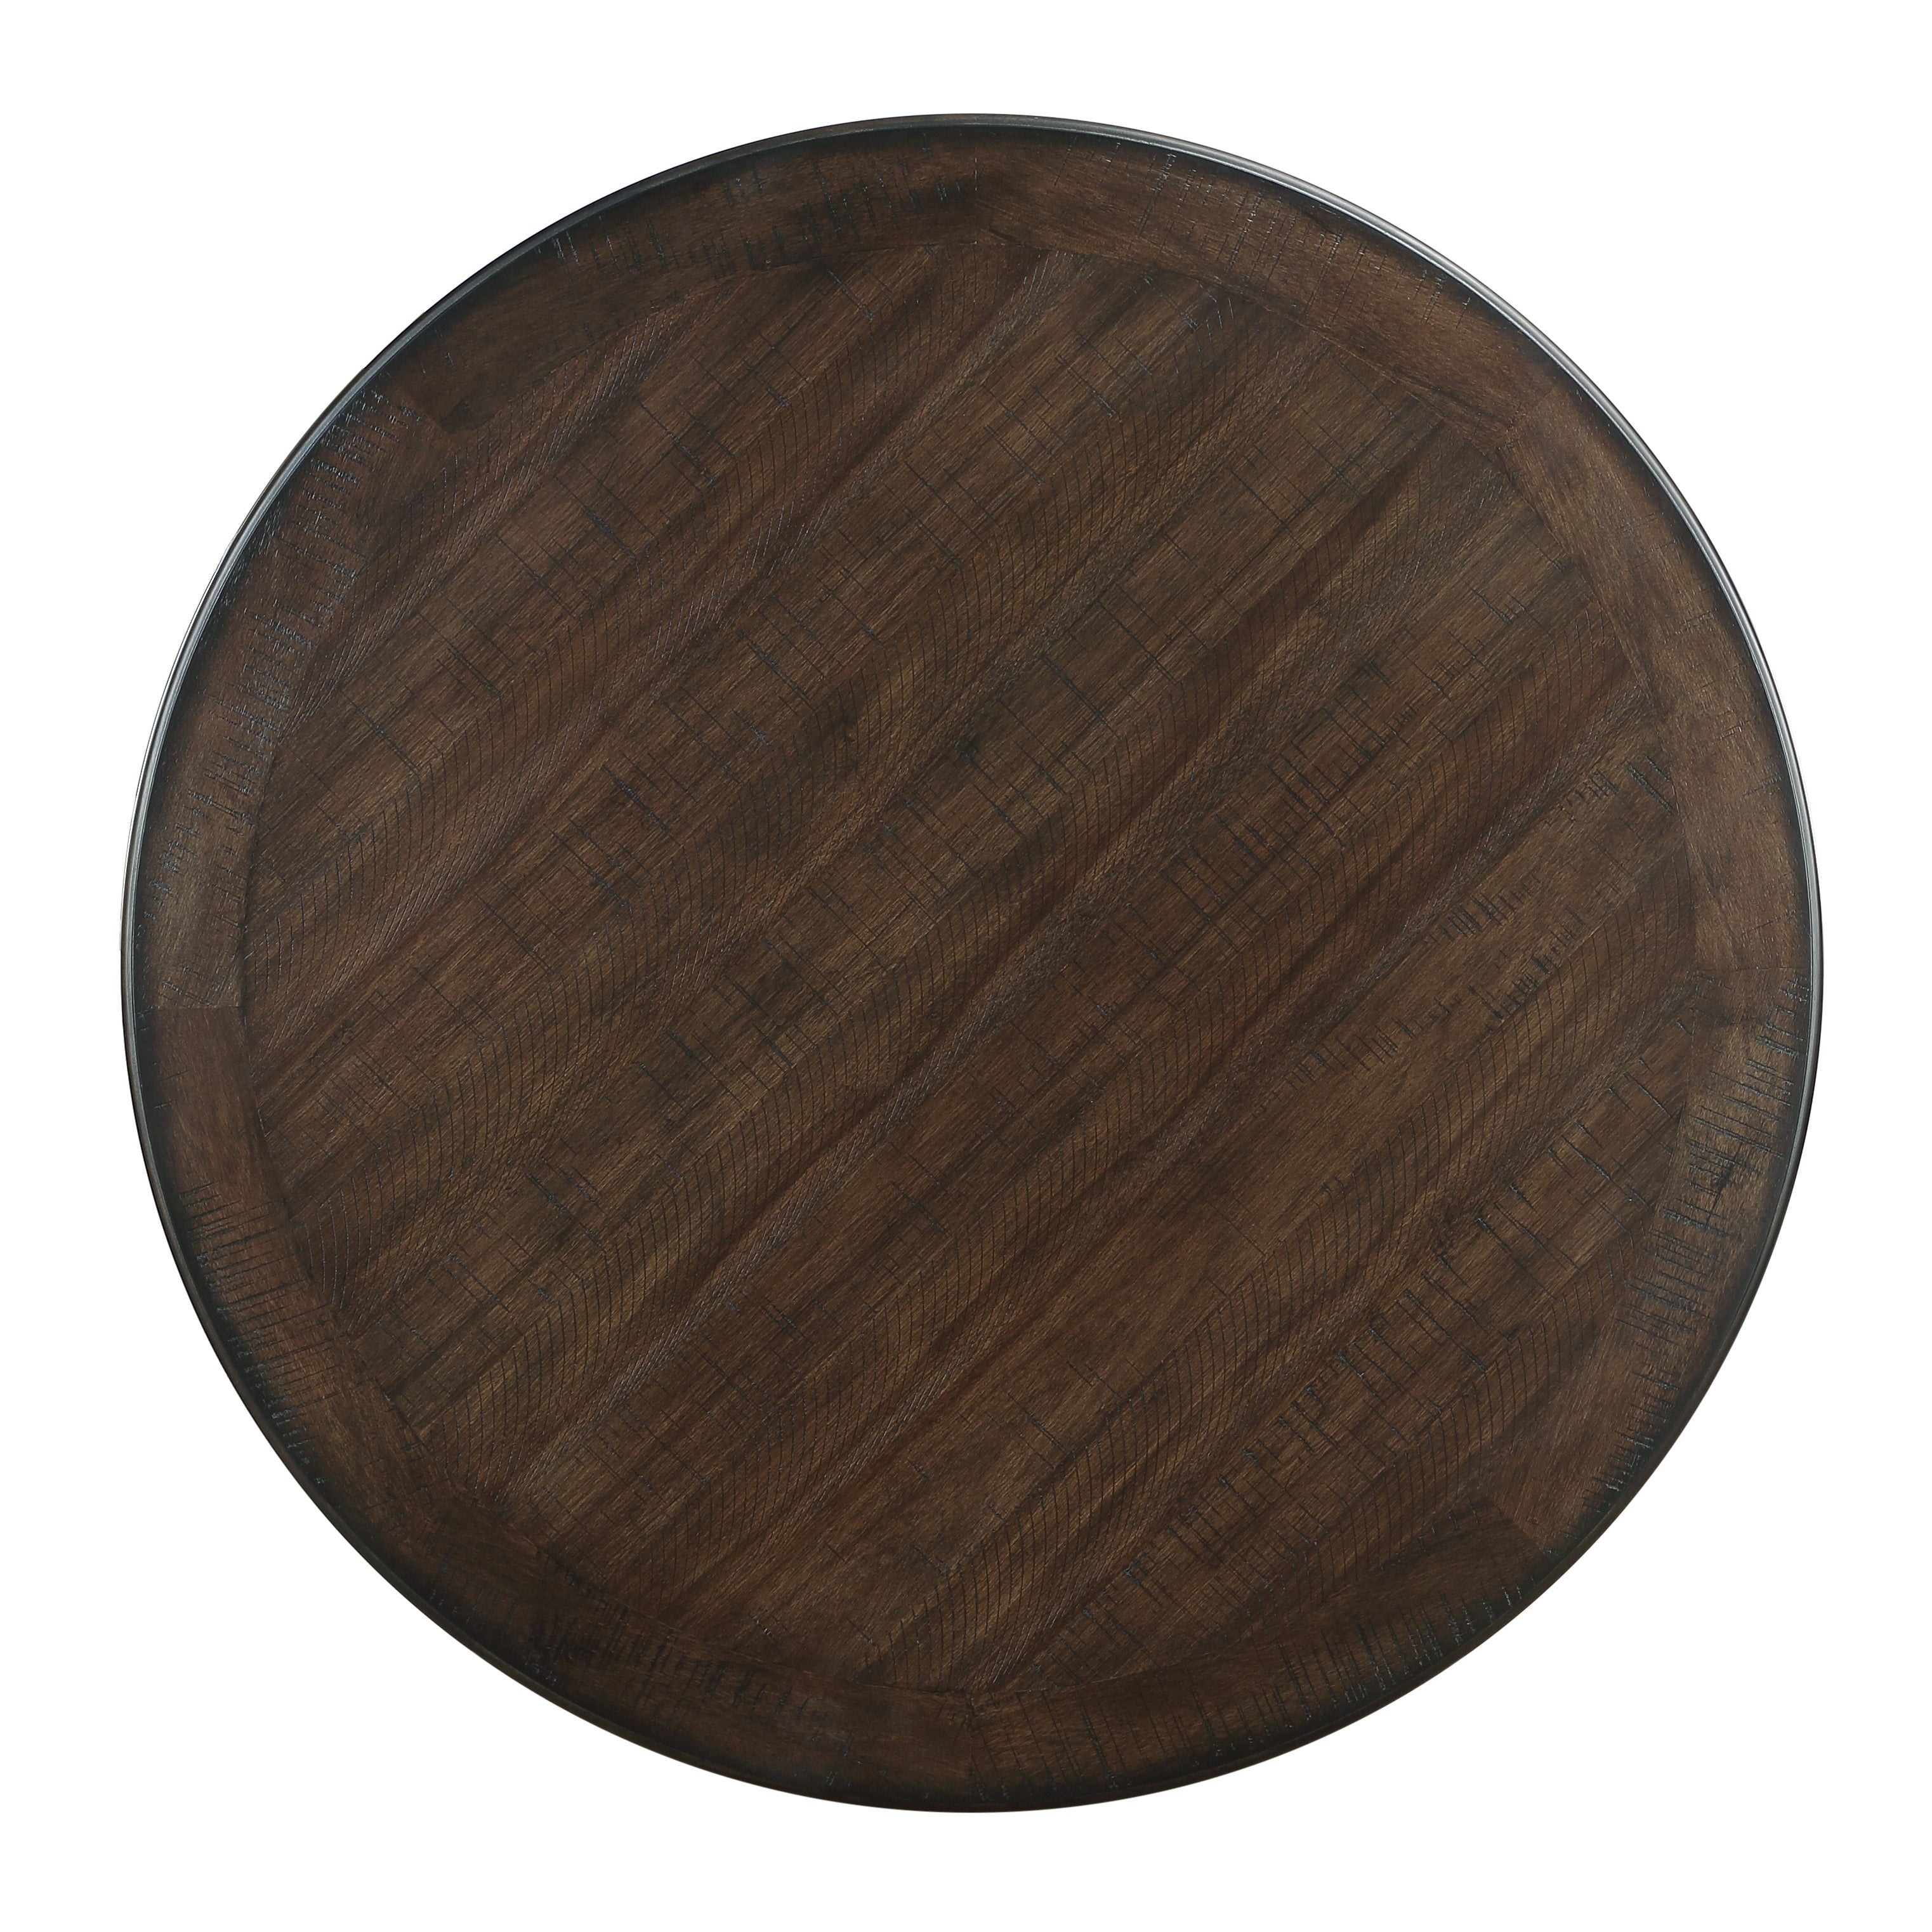 Asher Black/Brown Round Dining Table - 5800BK-48RD - Bien Home Furniture &amp; Electronics